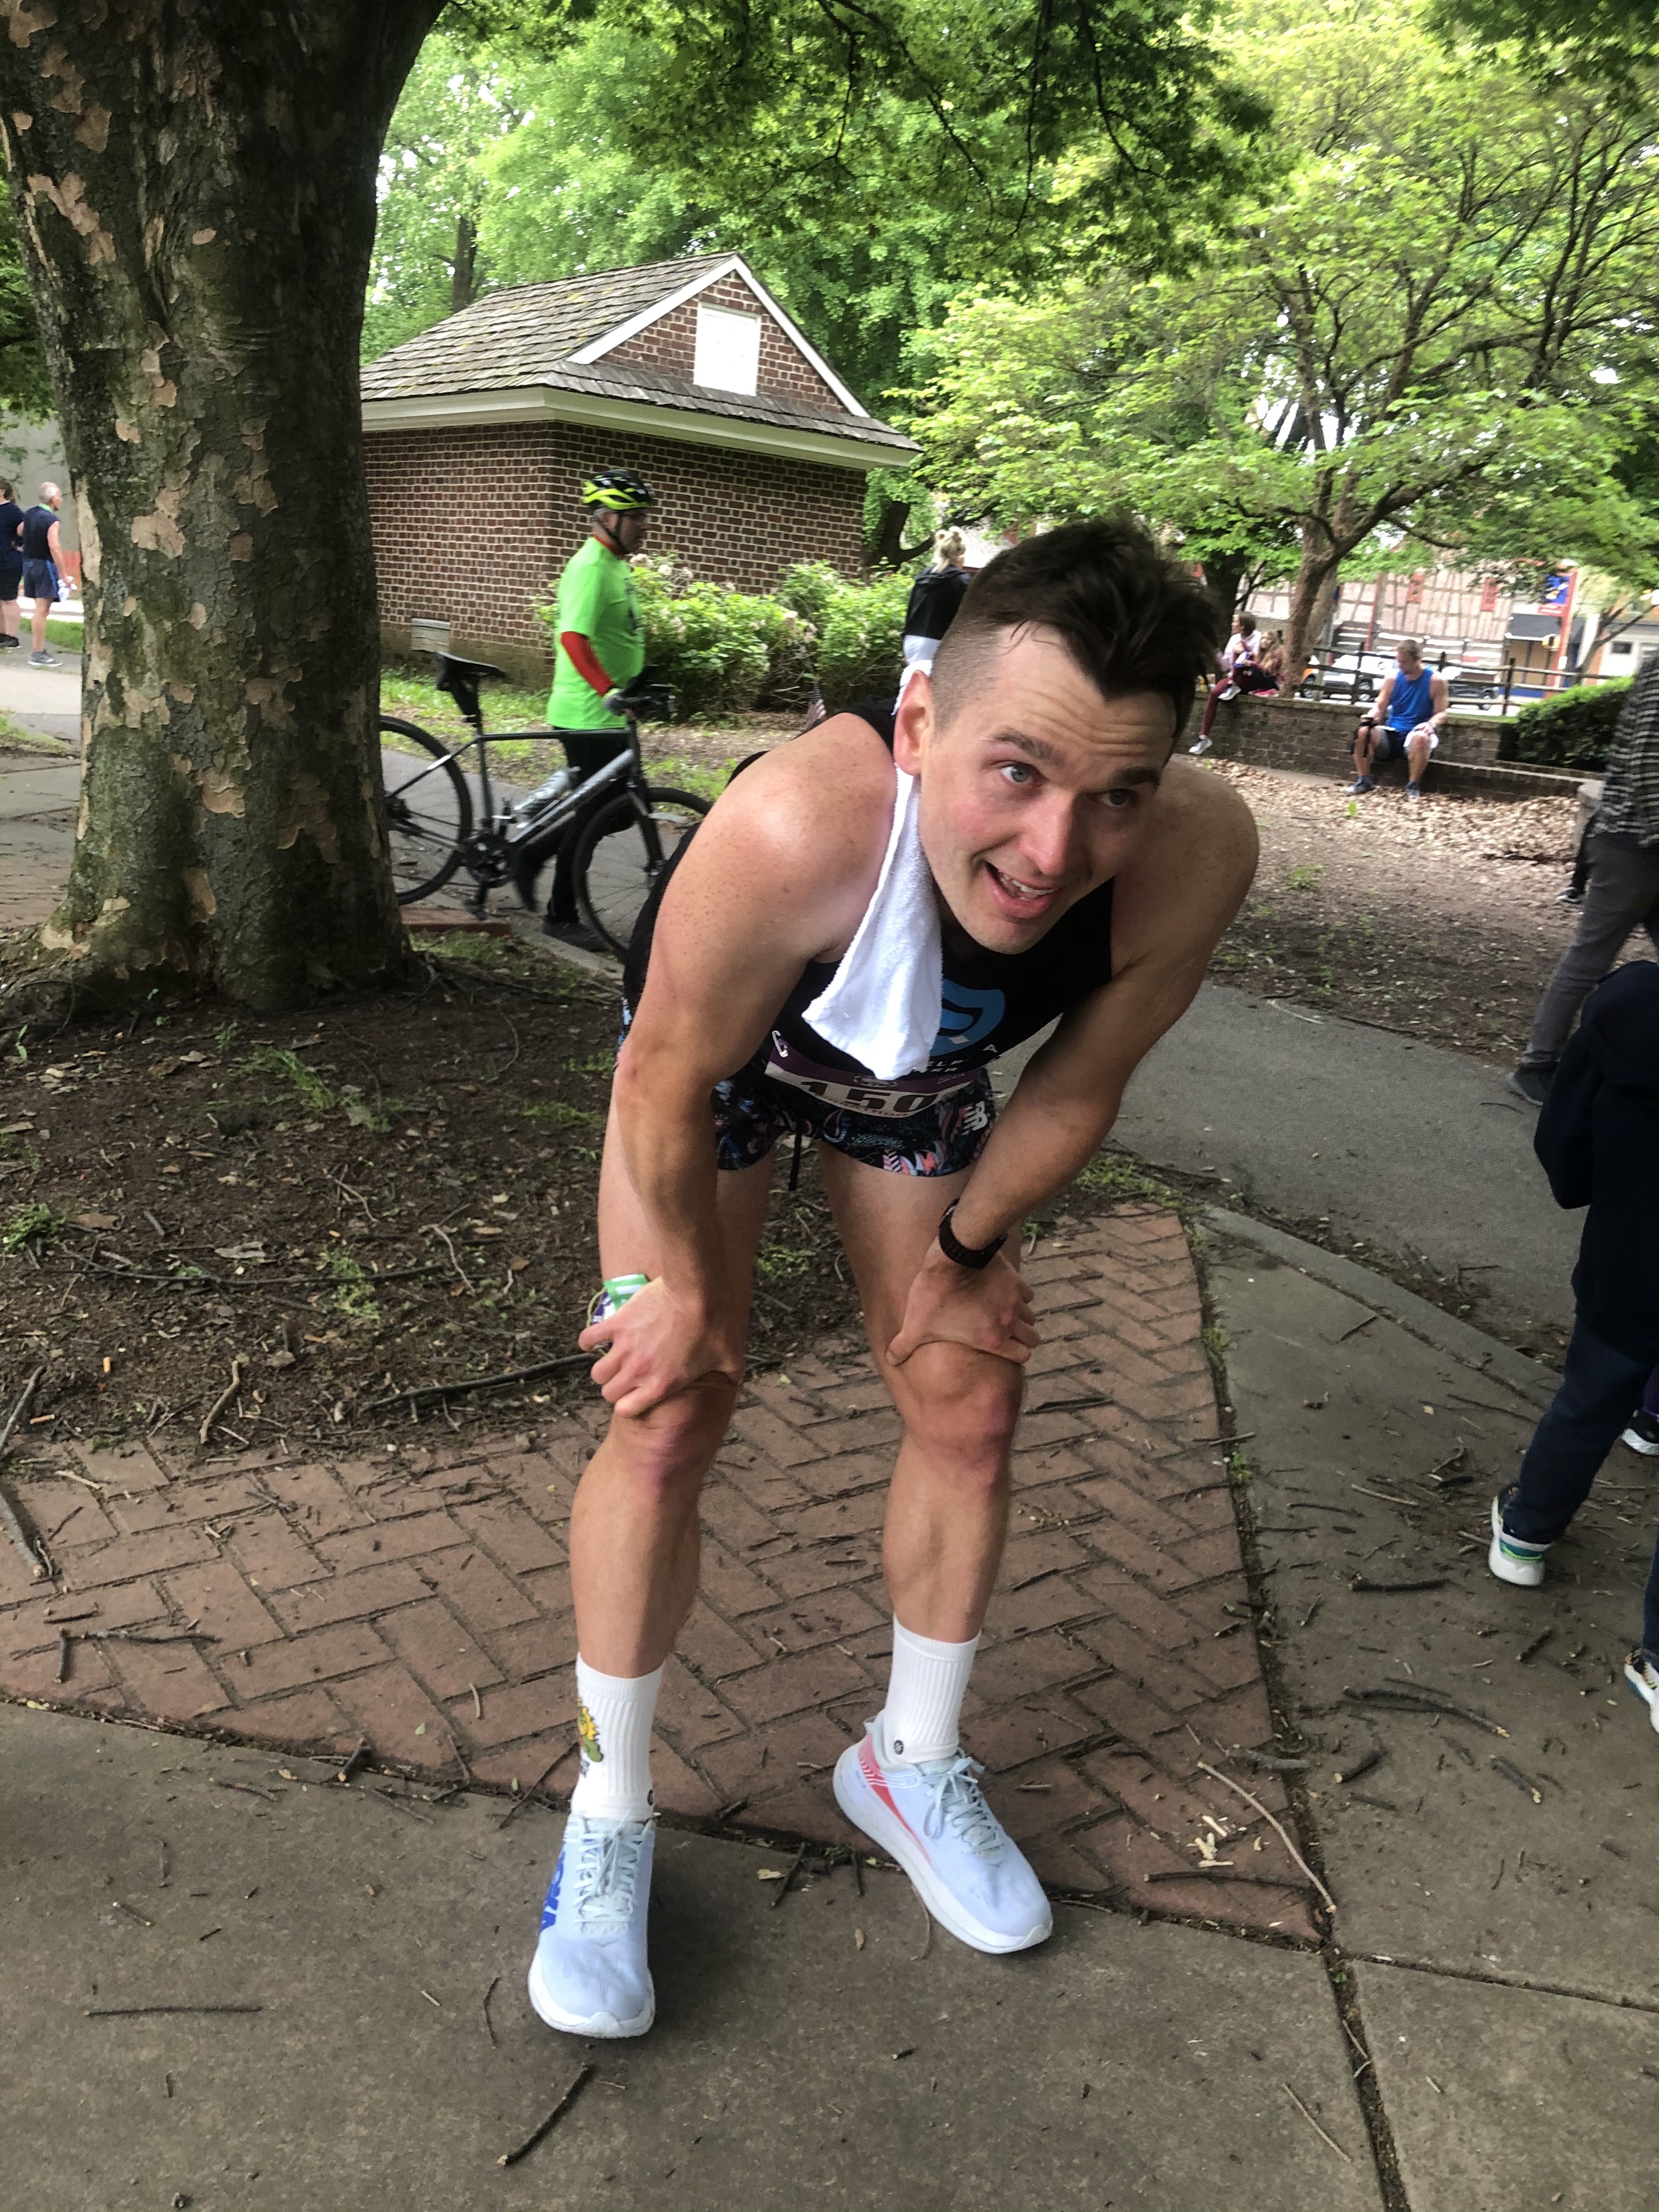 Will Vedder folded over after the conclusion of 2021 York County Marathon